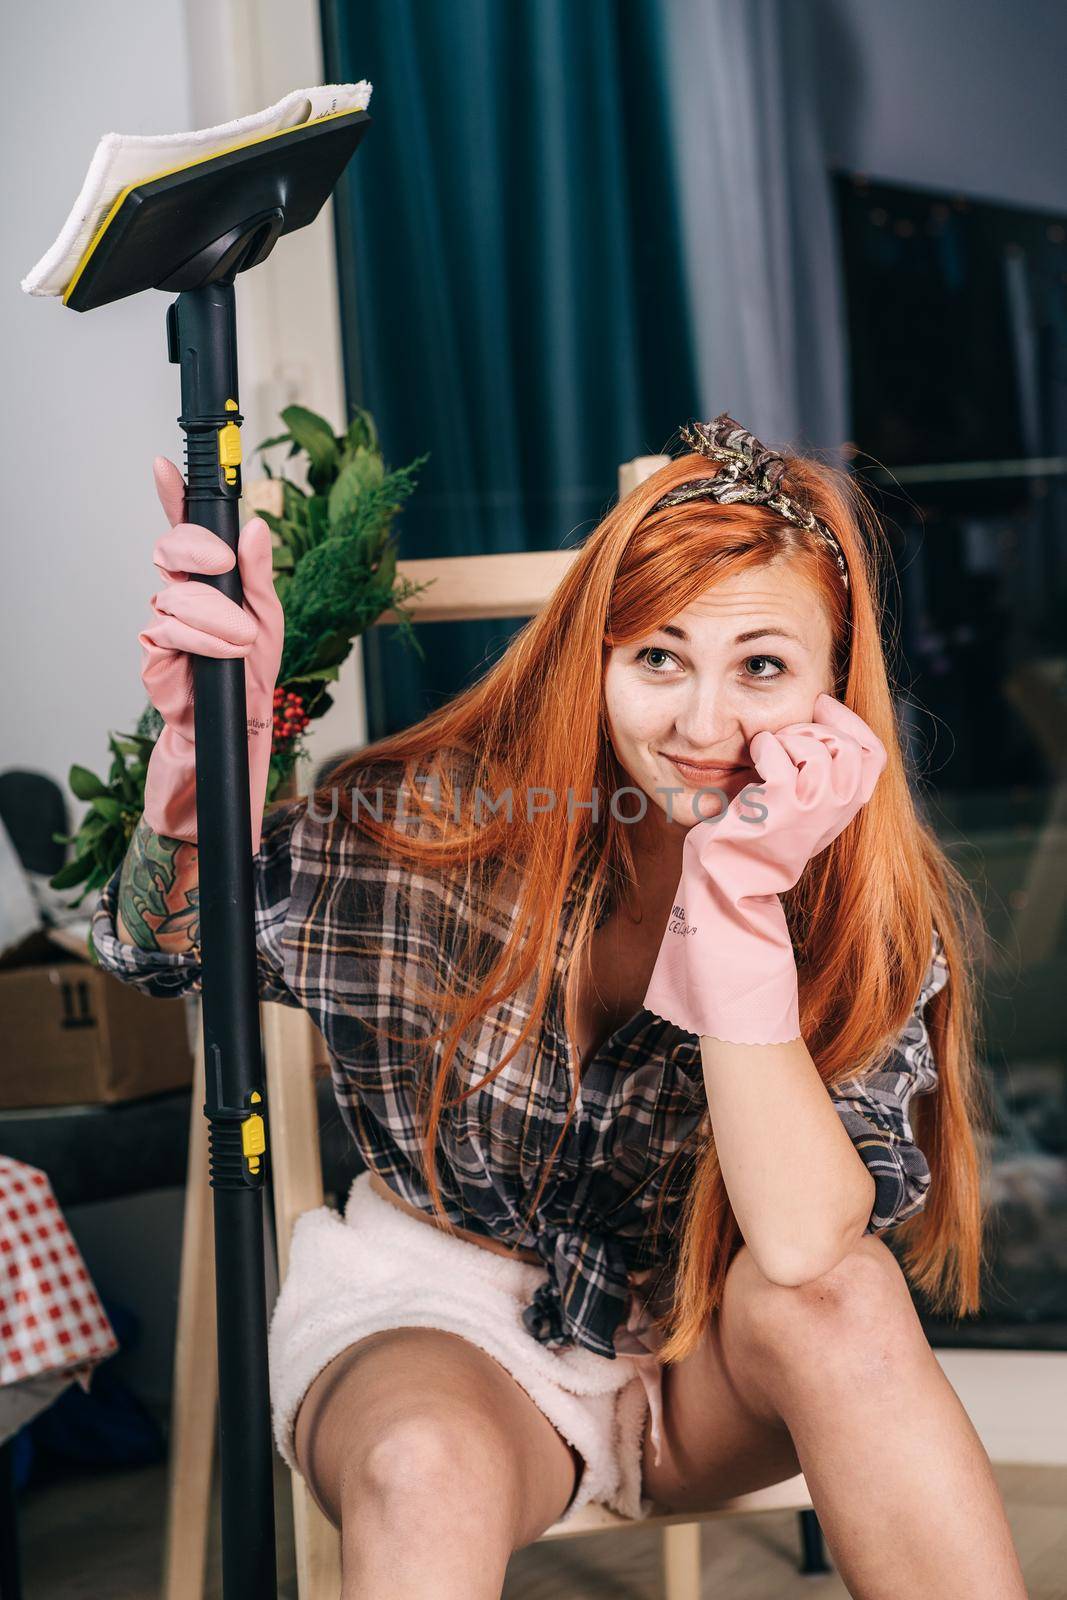 A housewife in rubber gloves holds a vacuum cleaner in her hands by Praximon